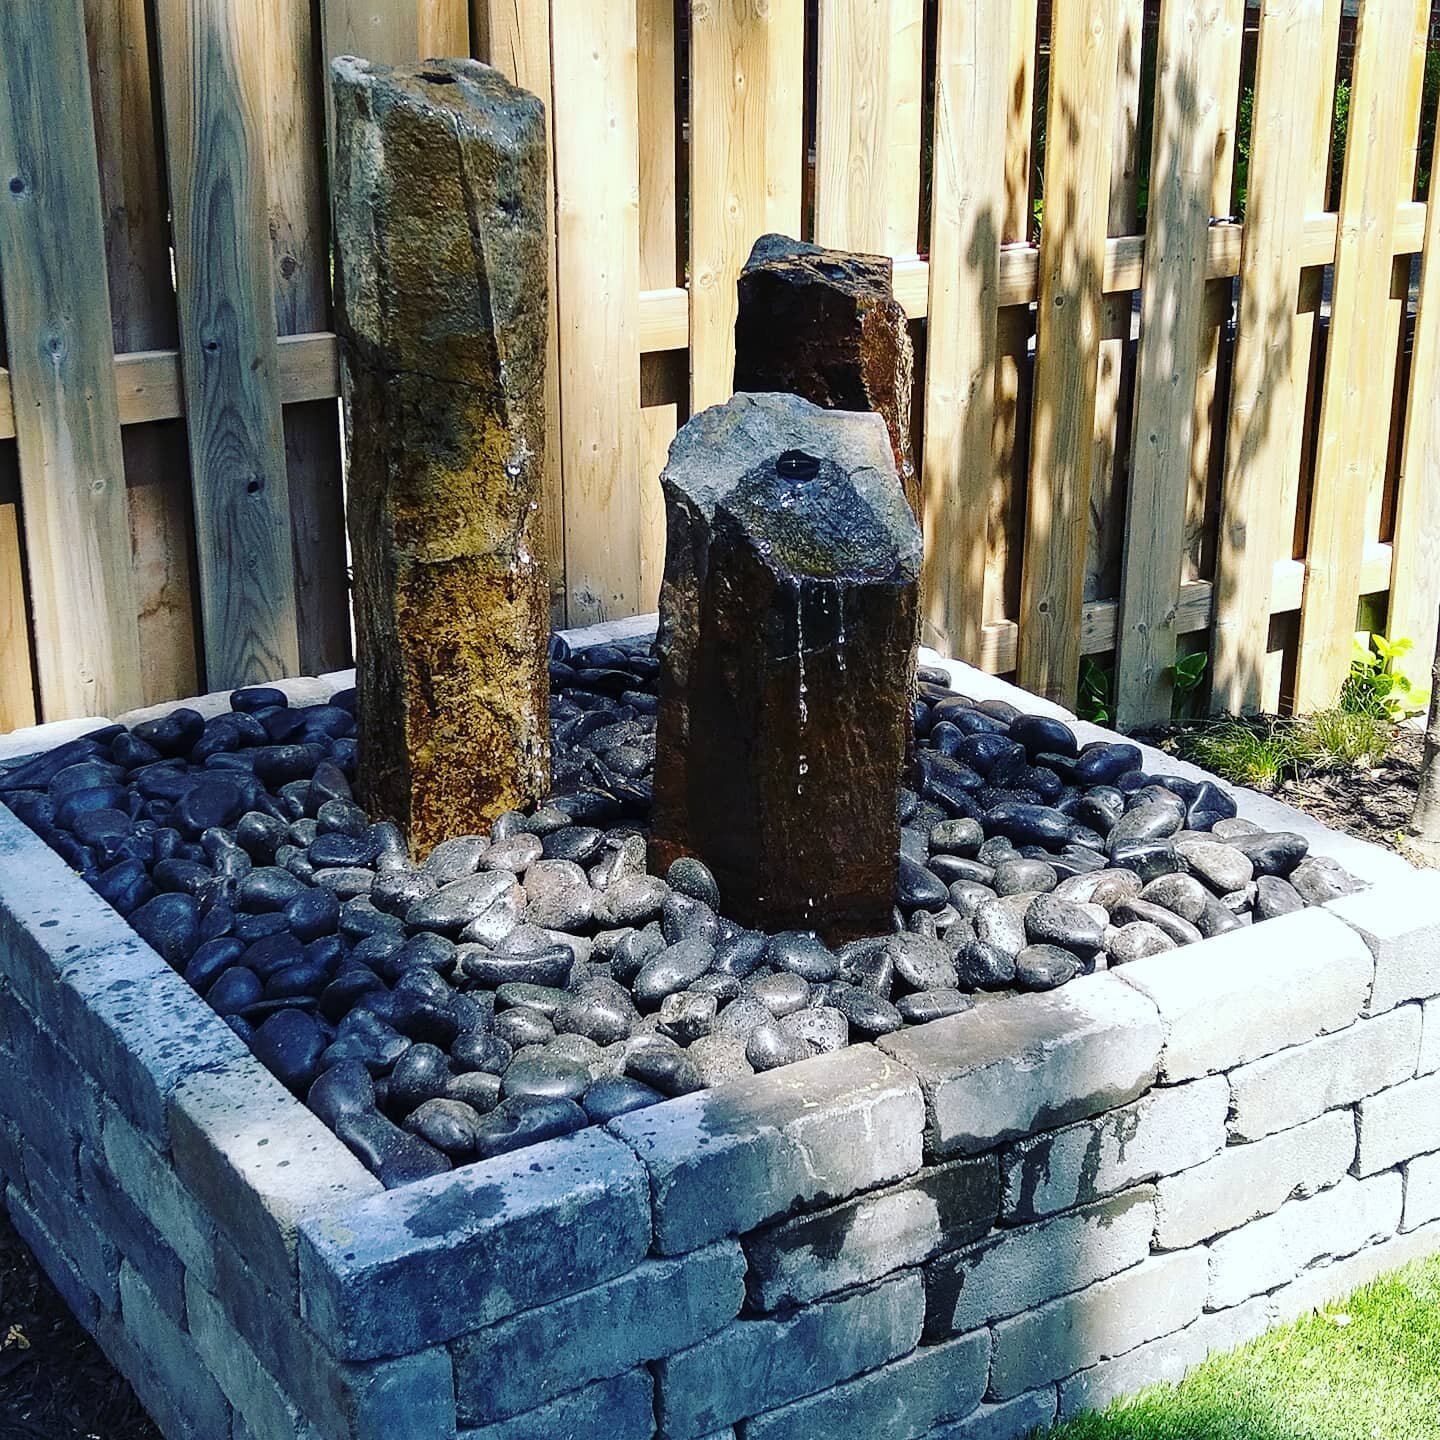 Nothing screams better than a brand new water feature to kick start the weekend🌞Geyser water feature with polished black beach pebbles 👷#kingsgrovecontracting 👊
.
.
.
.
#waterfeature #contrustion #hardscape #ontario #ontariocontractor #canada🇨🇦